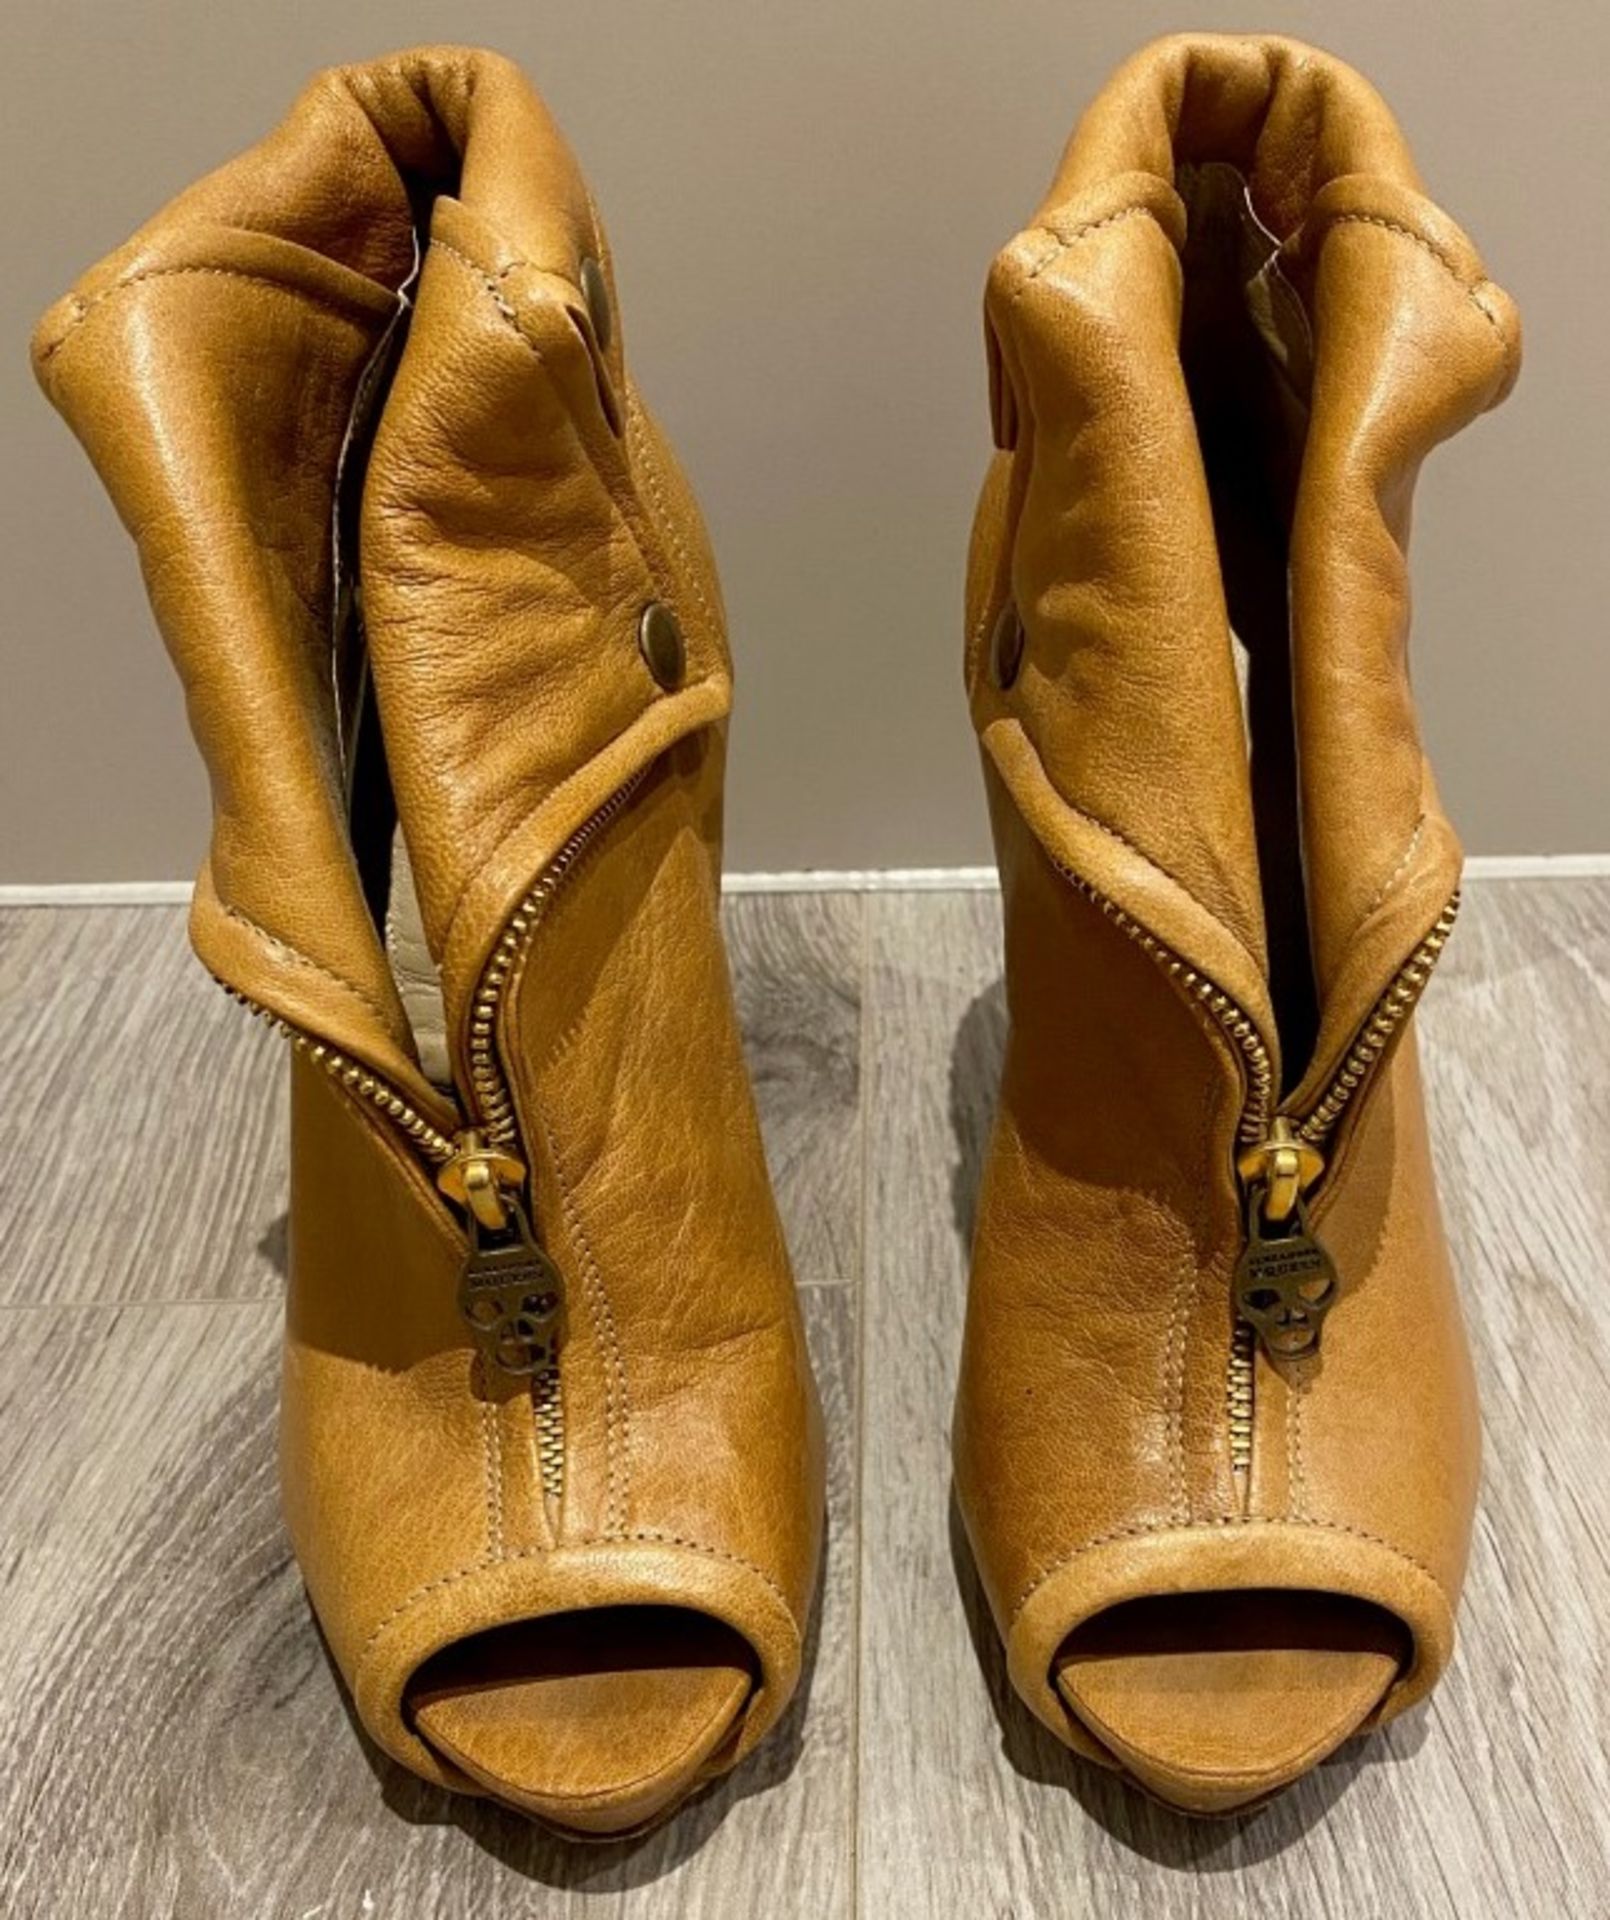 1 x Pair Of Genuine Alexander Mcqueen High Heel Shoes In Tan - Size: 37 - Preowned in Very Good - Image 2 of 4